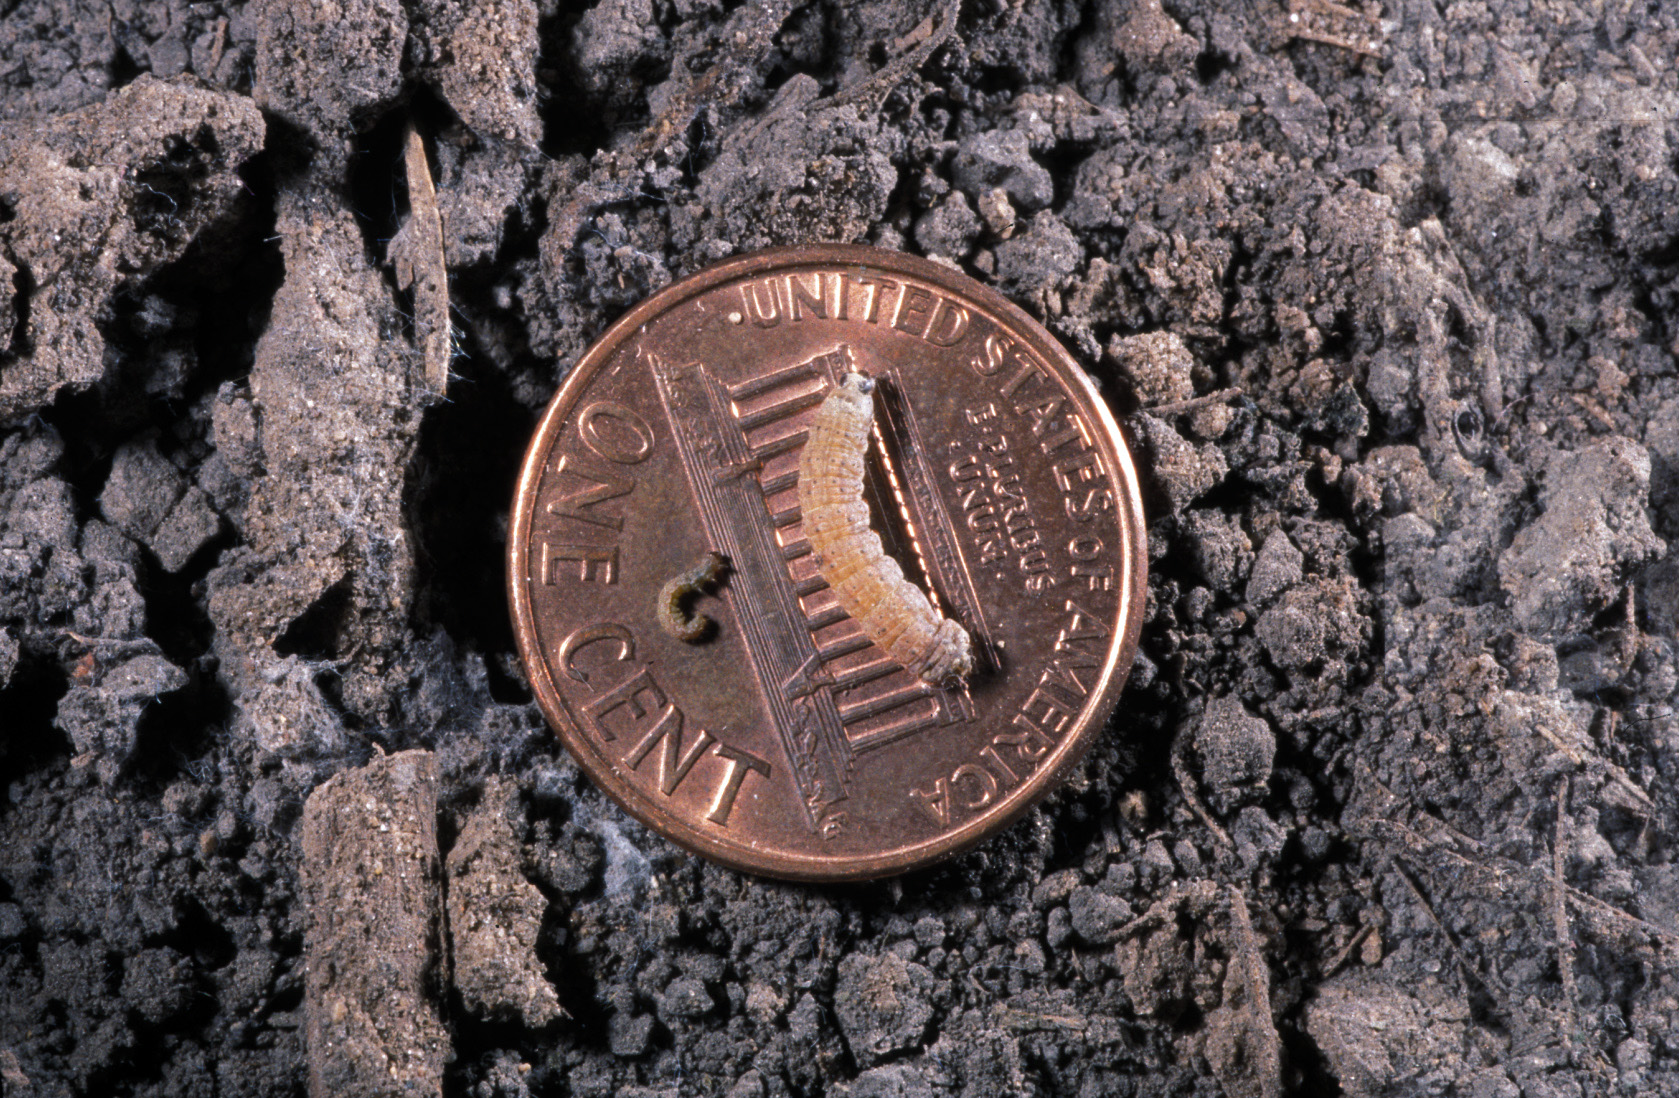 Black cutworm 2nd and 3rd instar larvae on a penny. 3rd instar, and larger, larvae can leaf feed on corn seedlings and begin cutting.